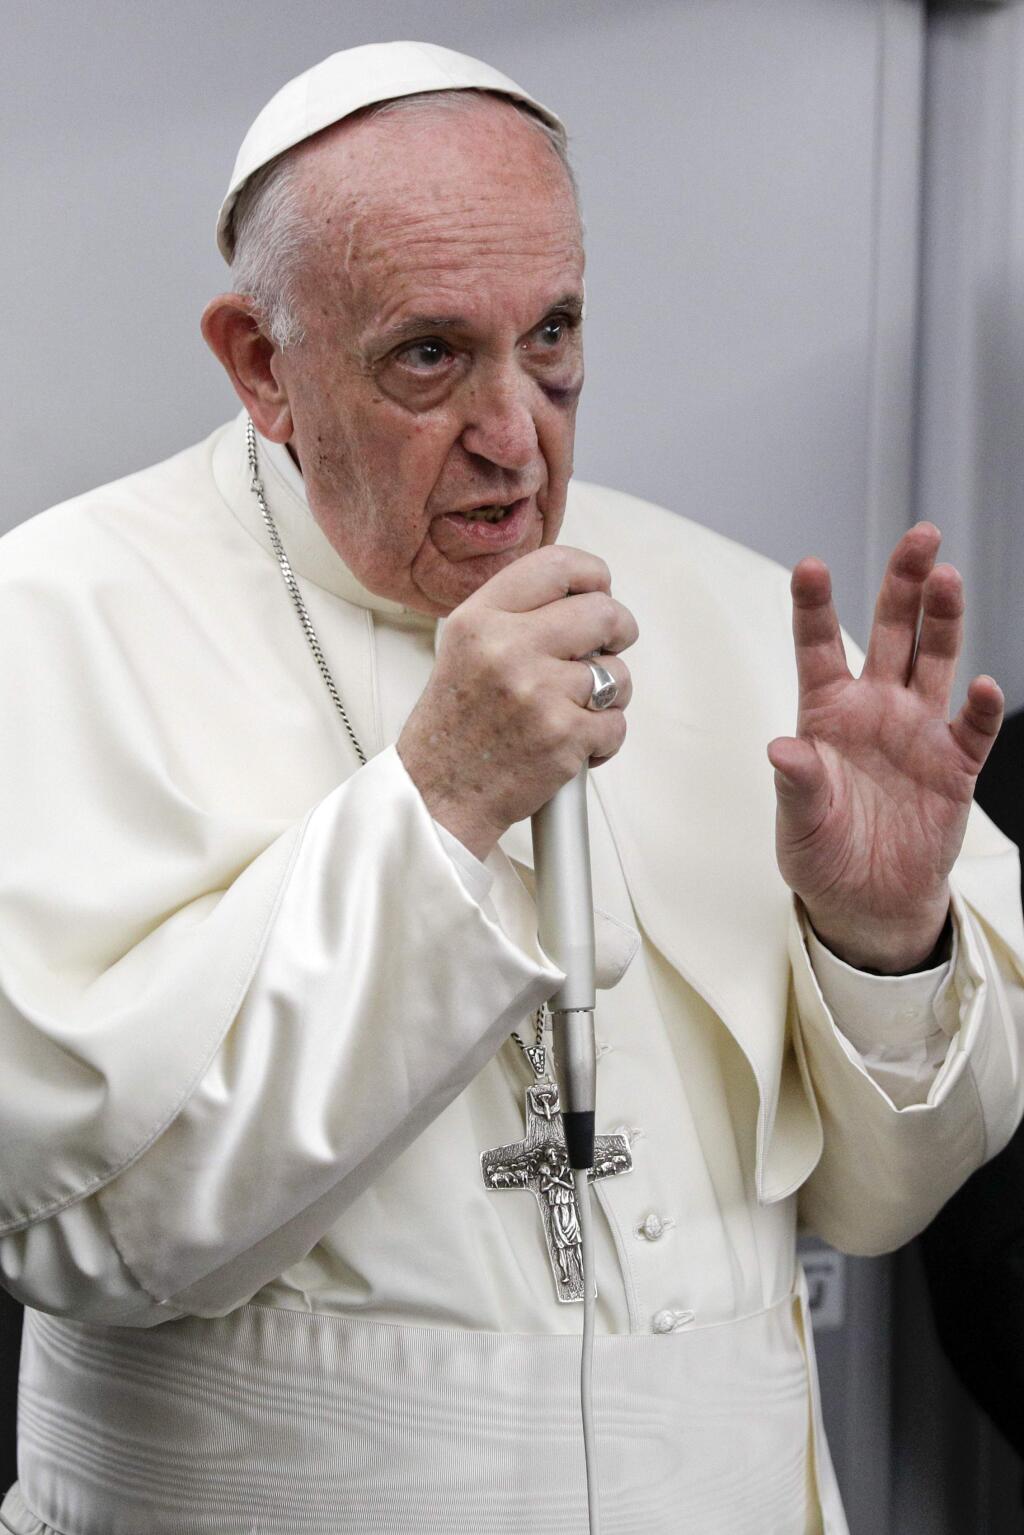 Pope Francis talks to journalists during a press conference he held on board the flight to Rome, at the end of a five-day visit to Colombia, Monday, Sept. 11, 2017. (AP Photo/Andrew Medichini, pool)